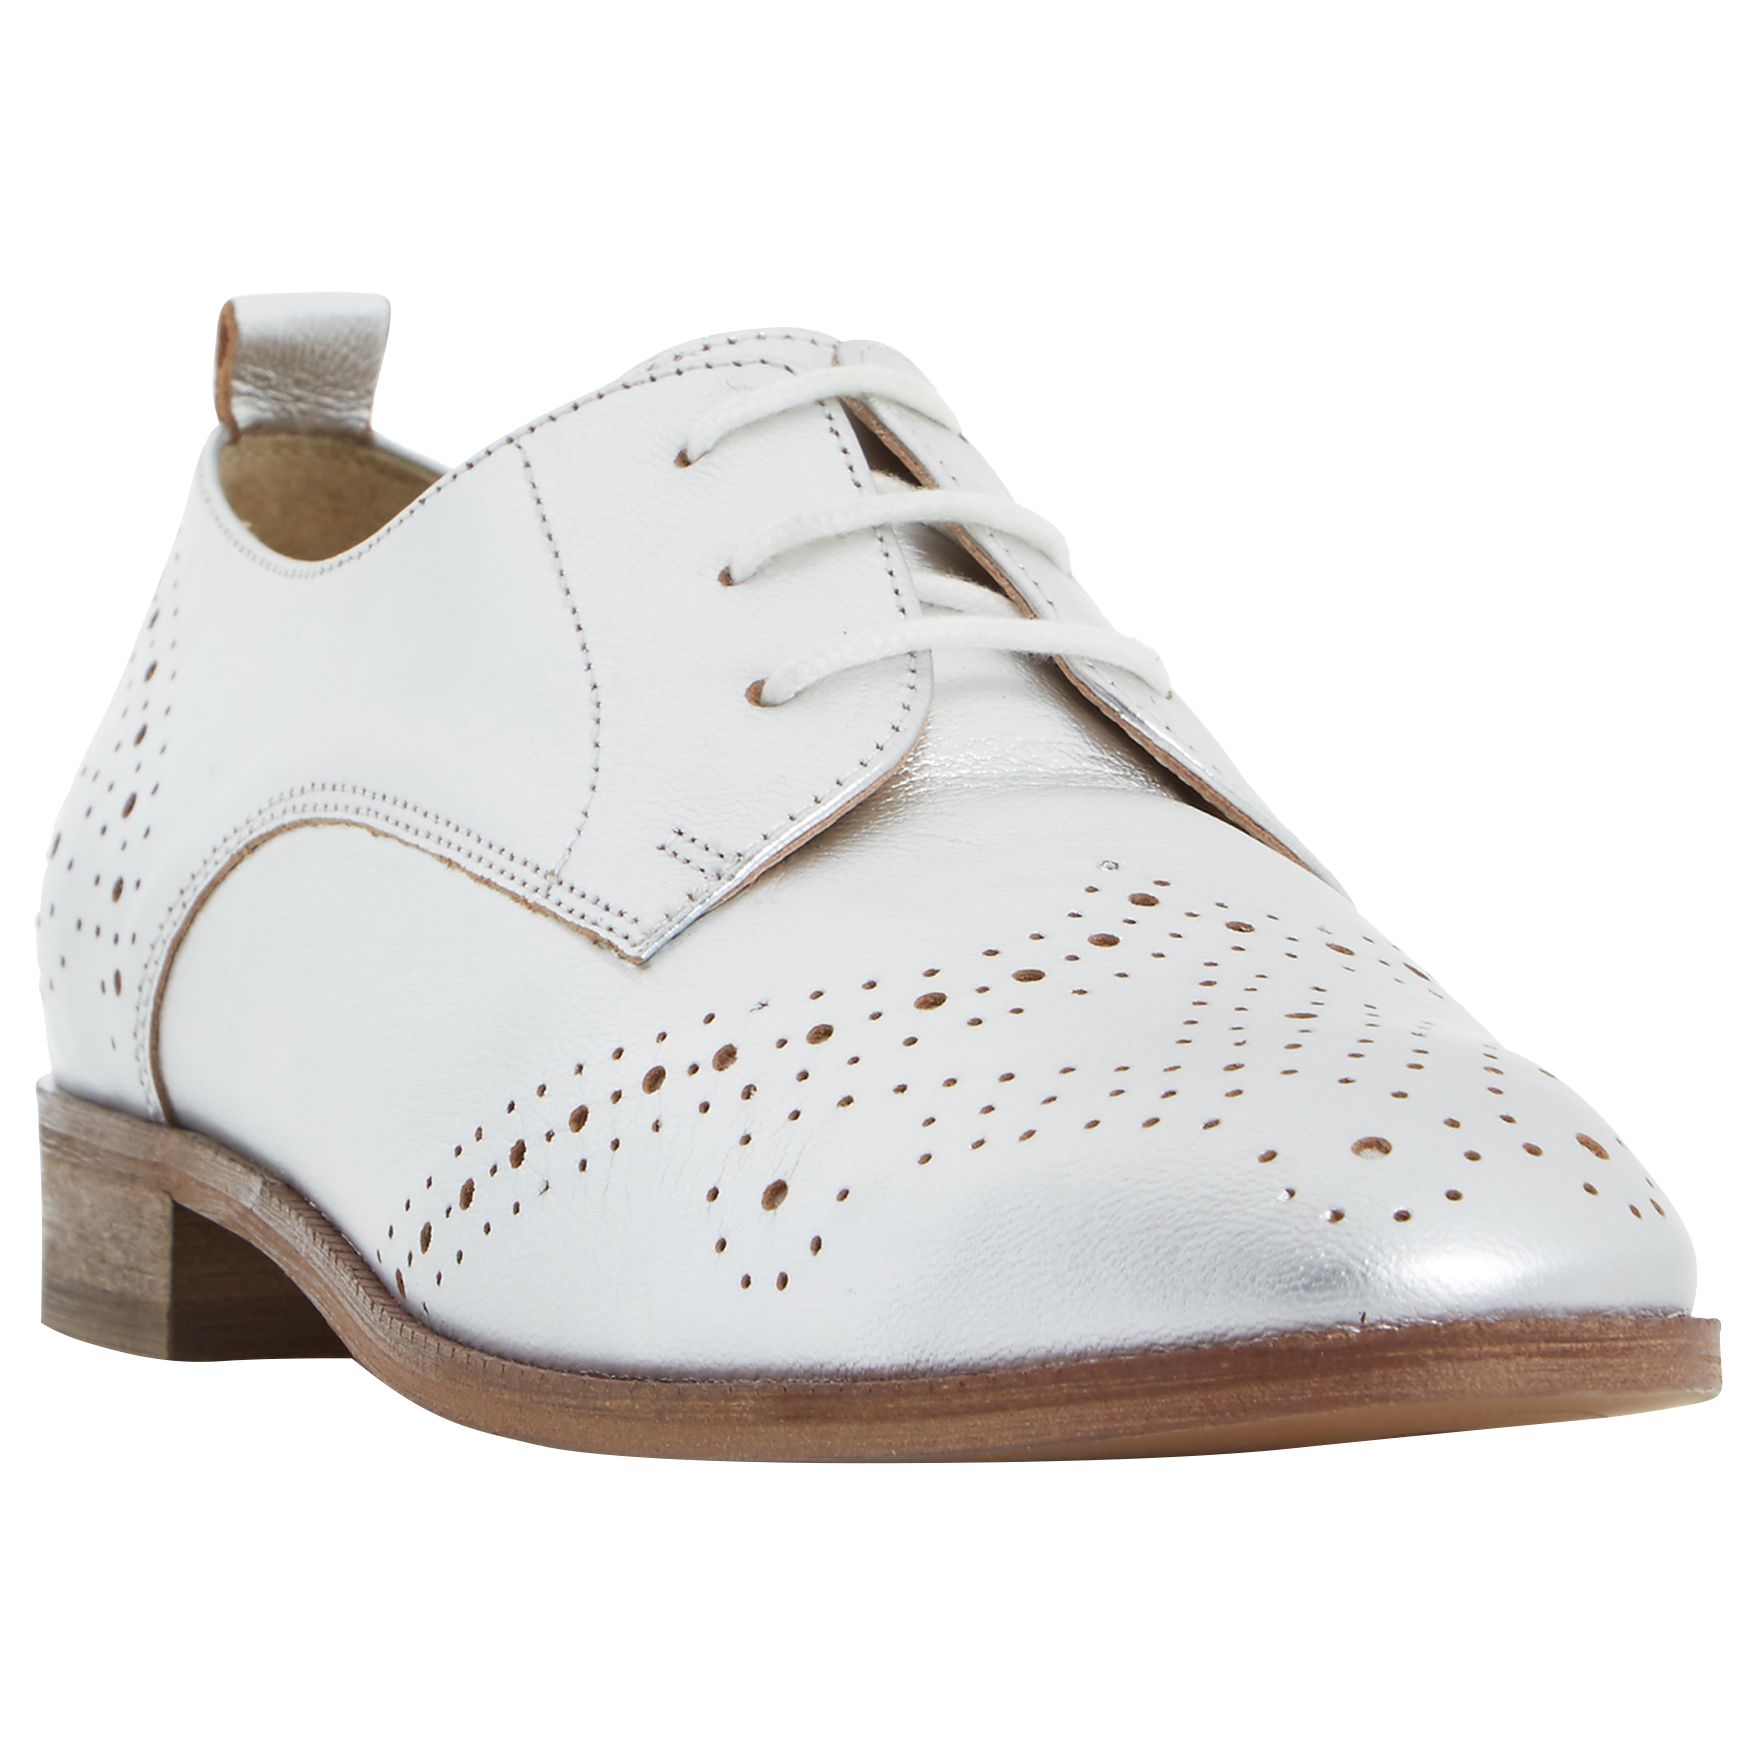 Dune Foster Lace Up Leather Brogues, Silver, 4